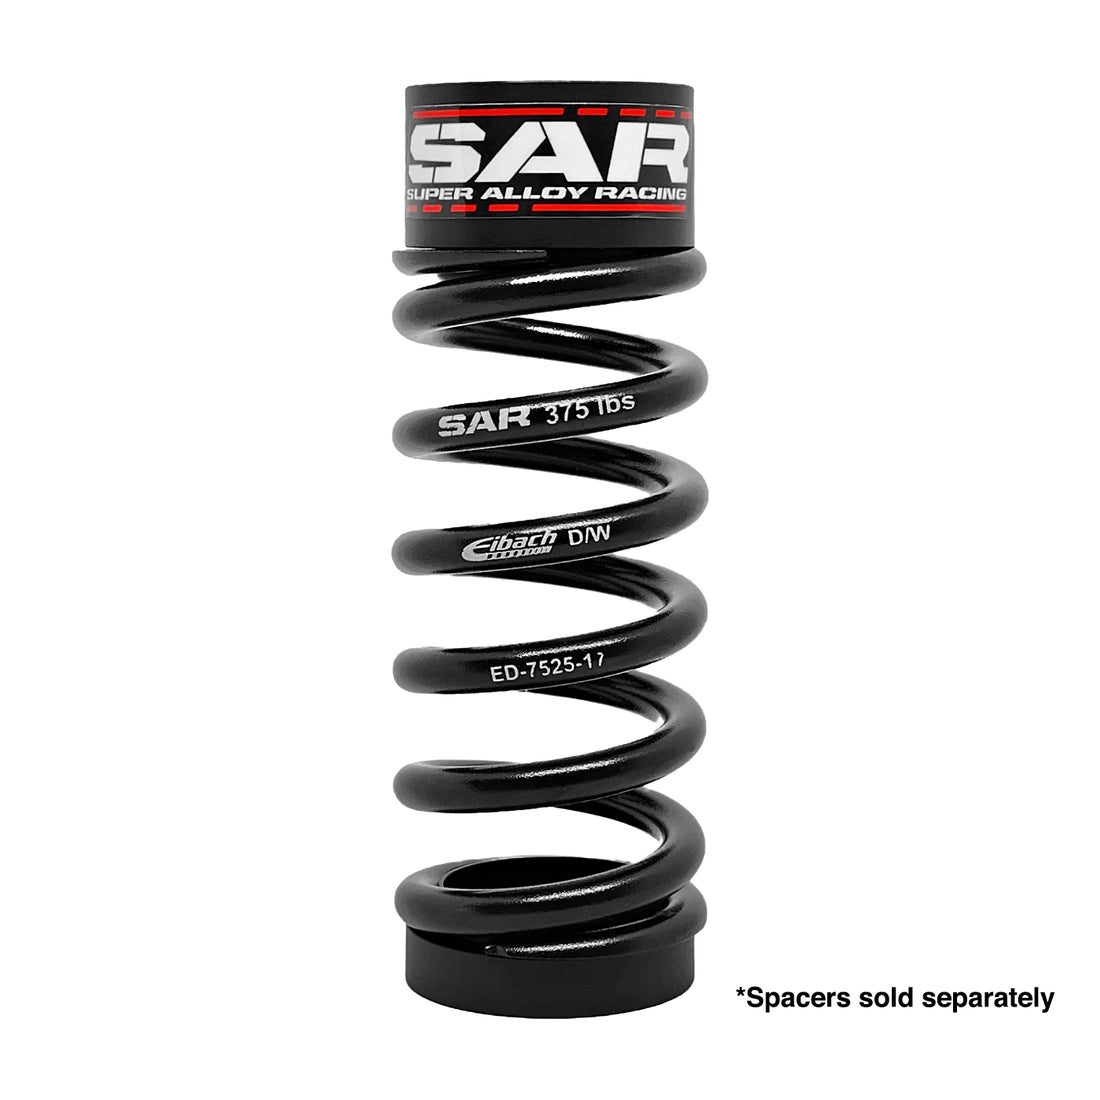 Super Alloy Racing Enduro Coil Spring 65mm Stroke - Spring Only